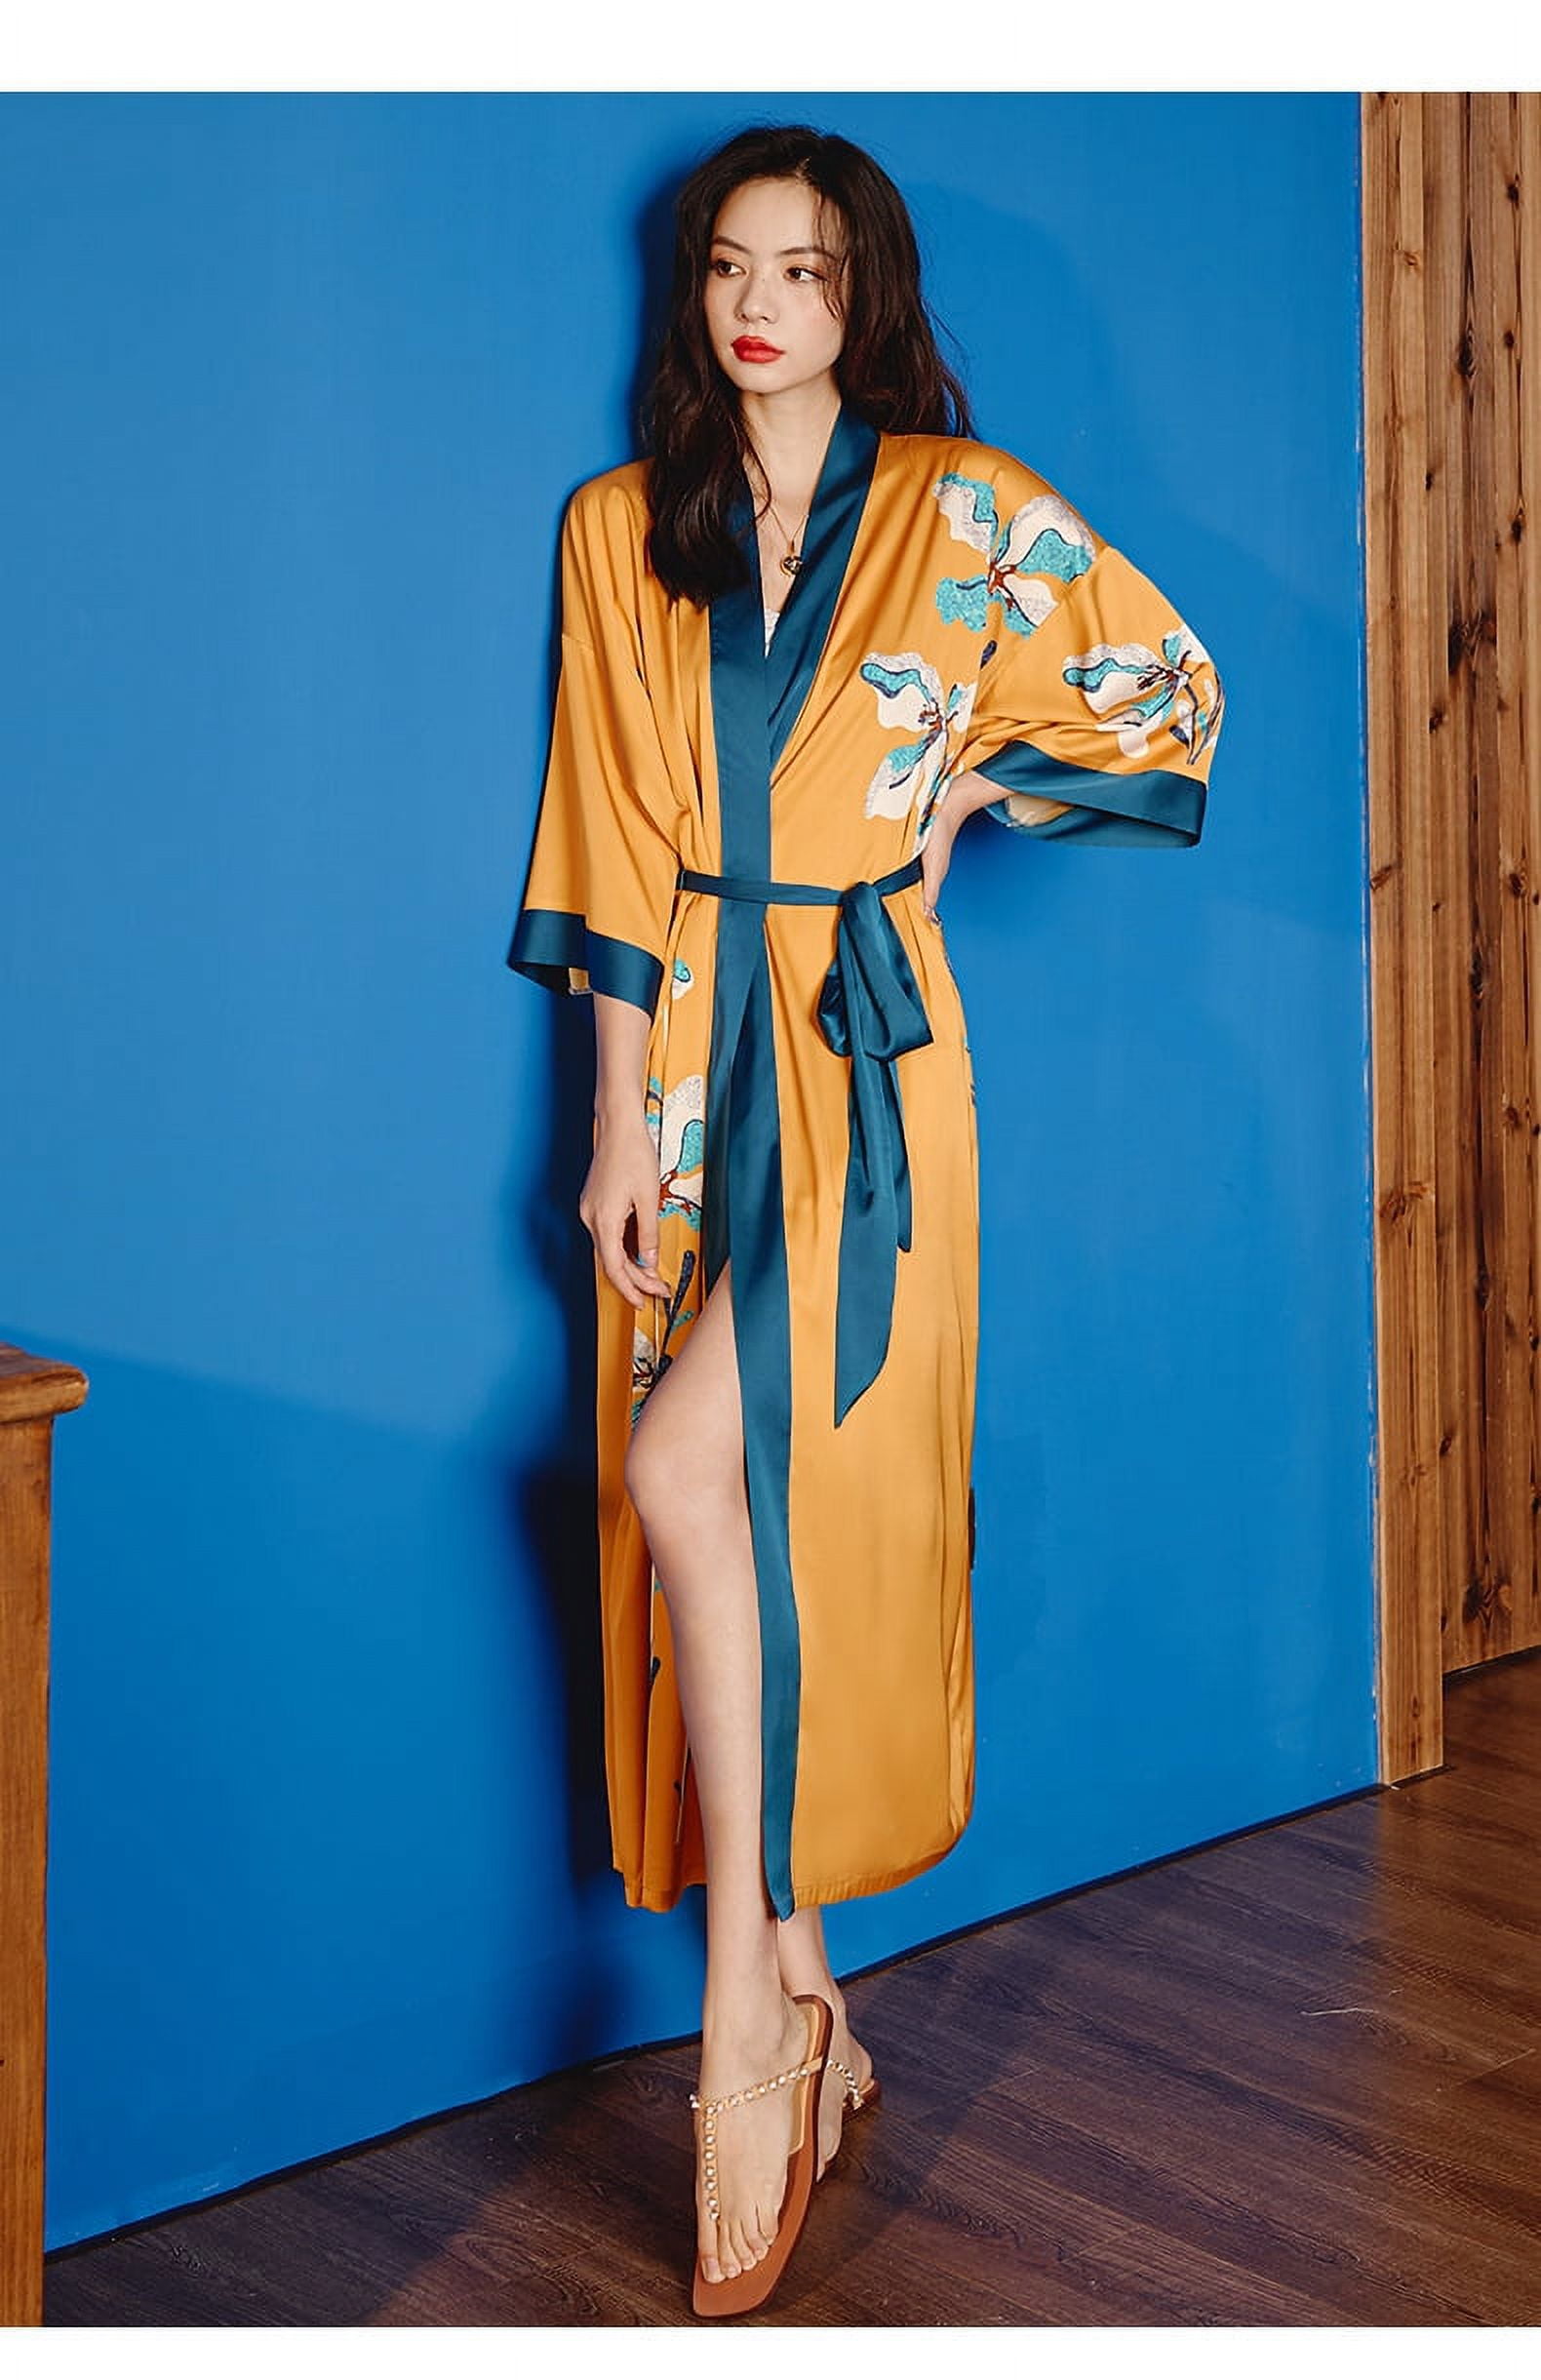 Ladies Robe Blue Satin Cotton Solid Color | Dressing Gowns